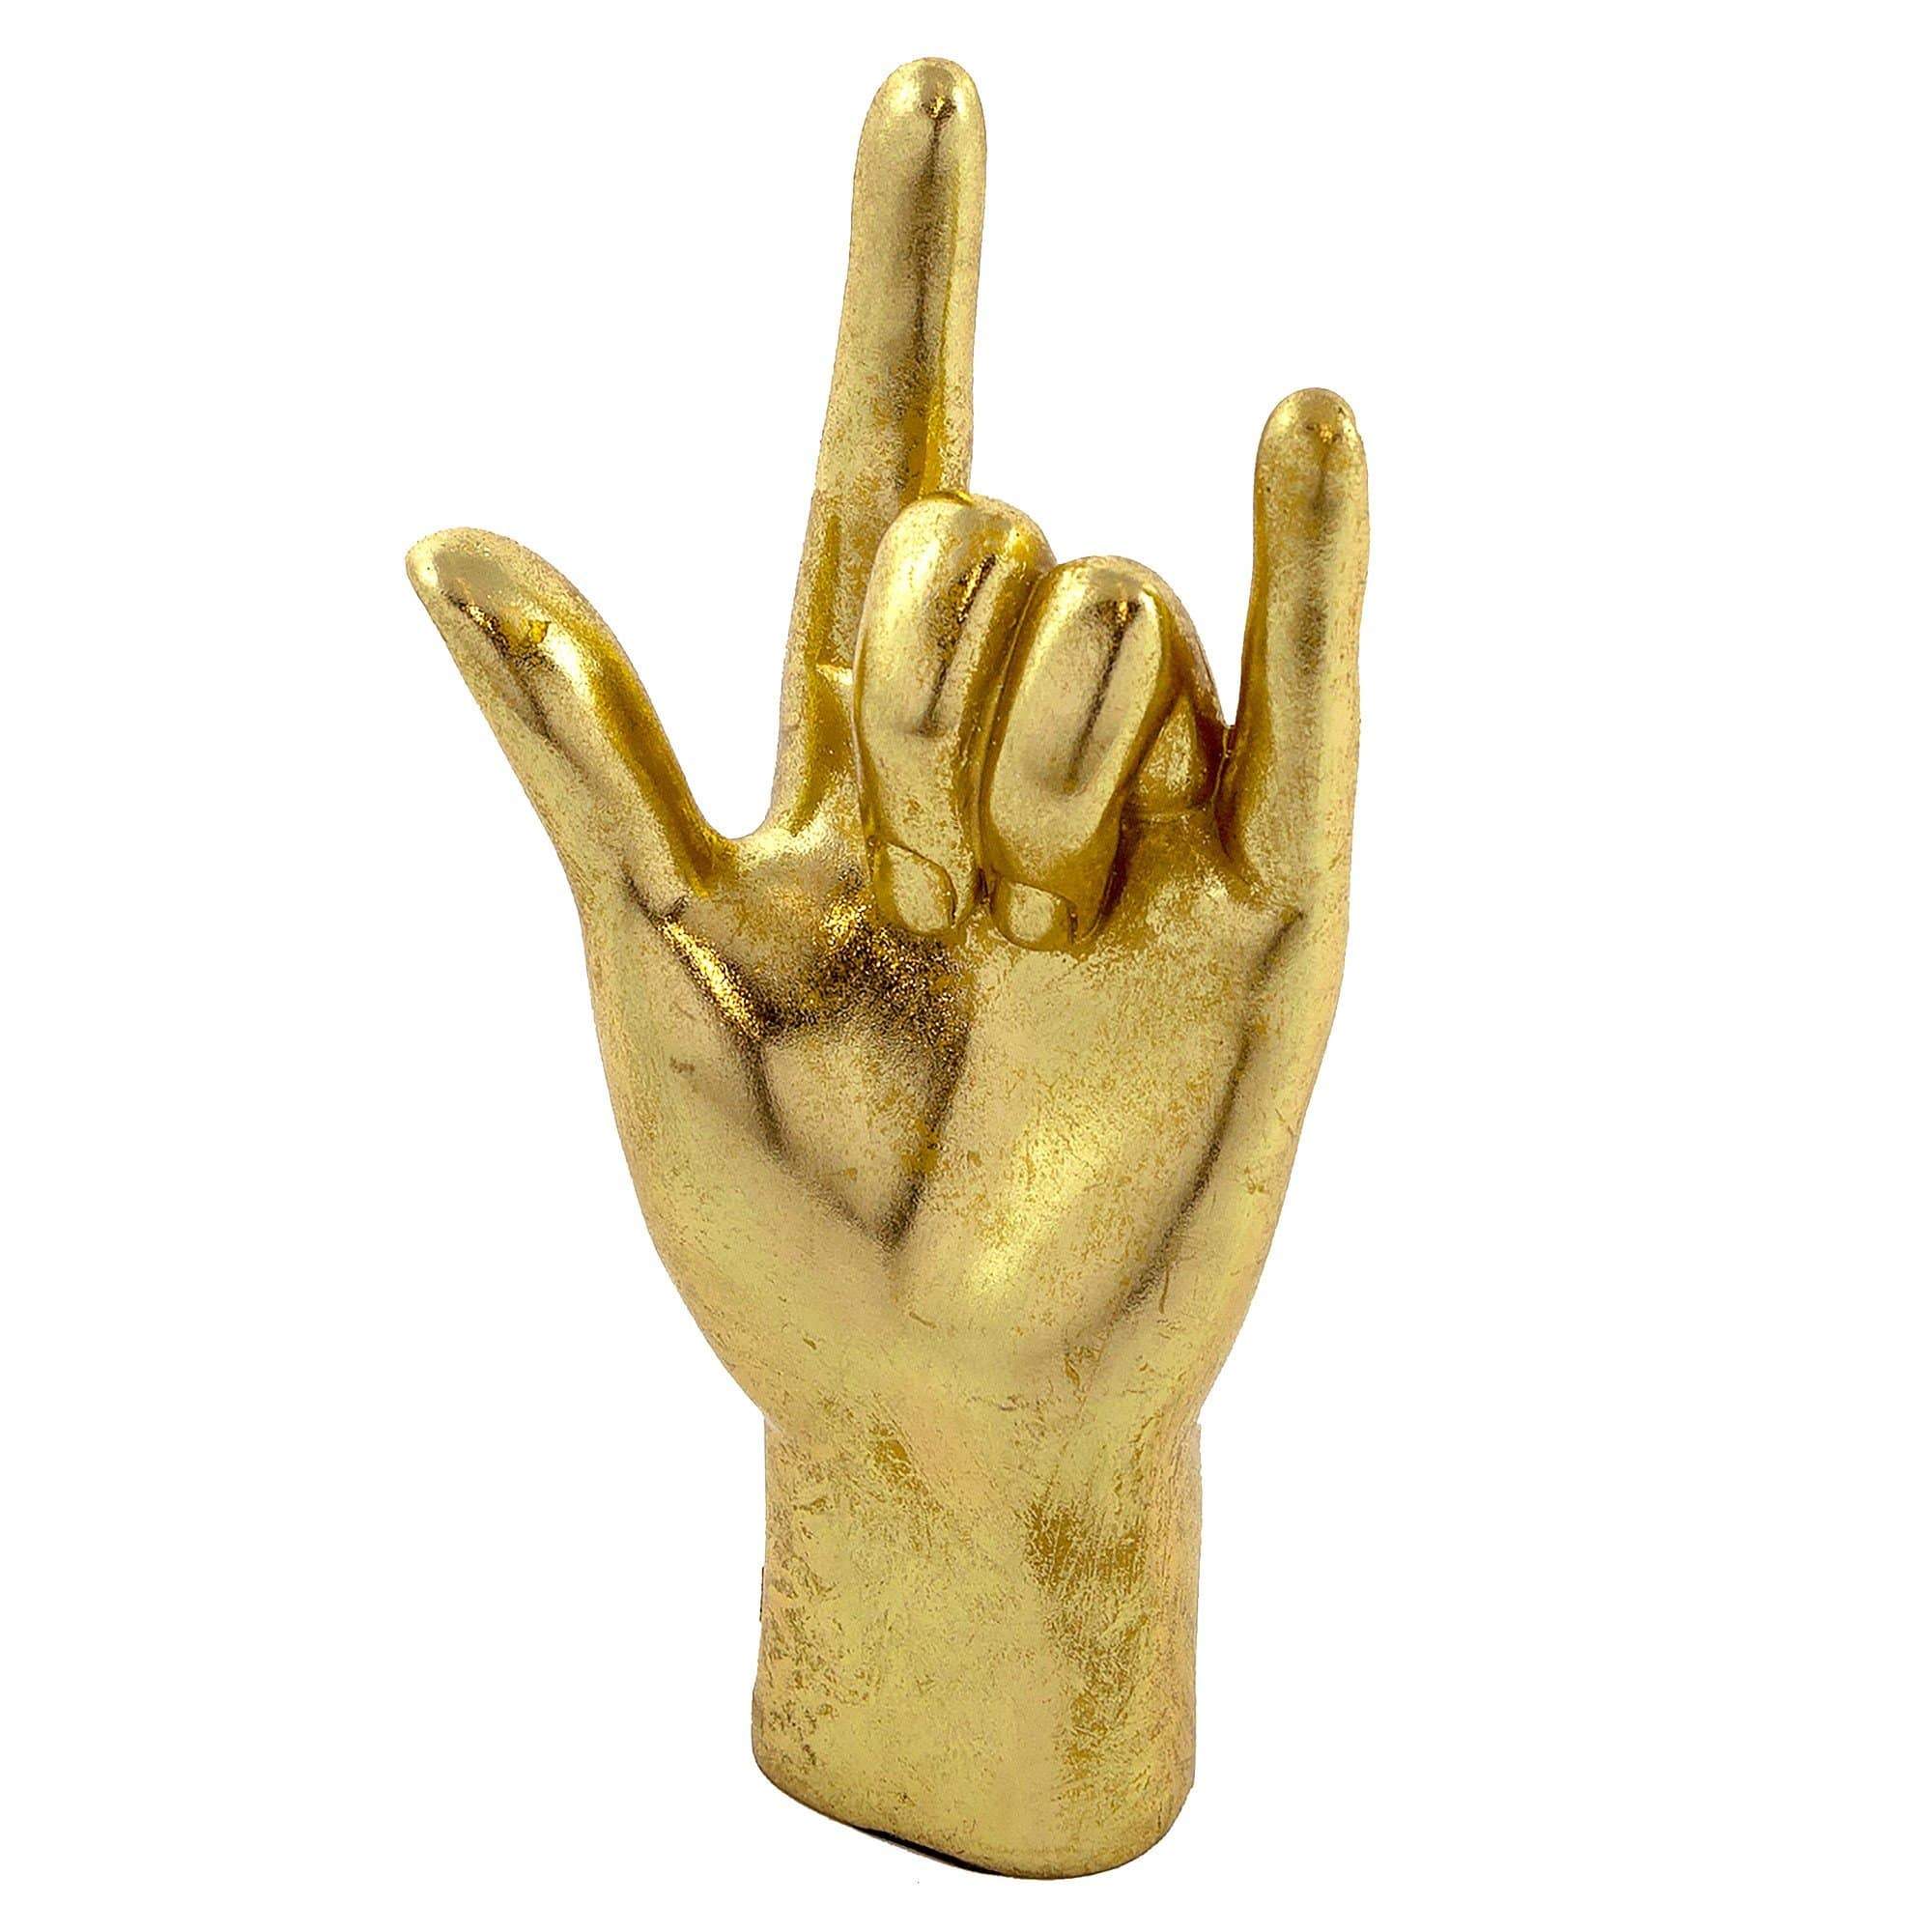 Gold 'Rock On!' Hand